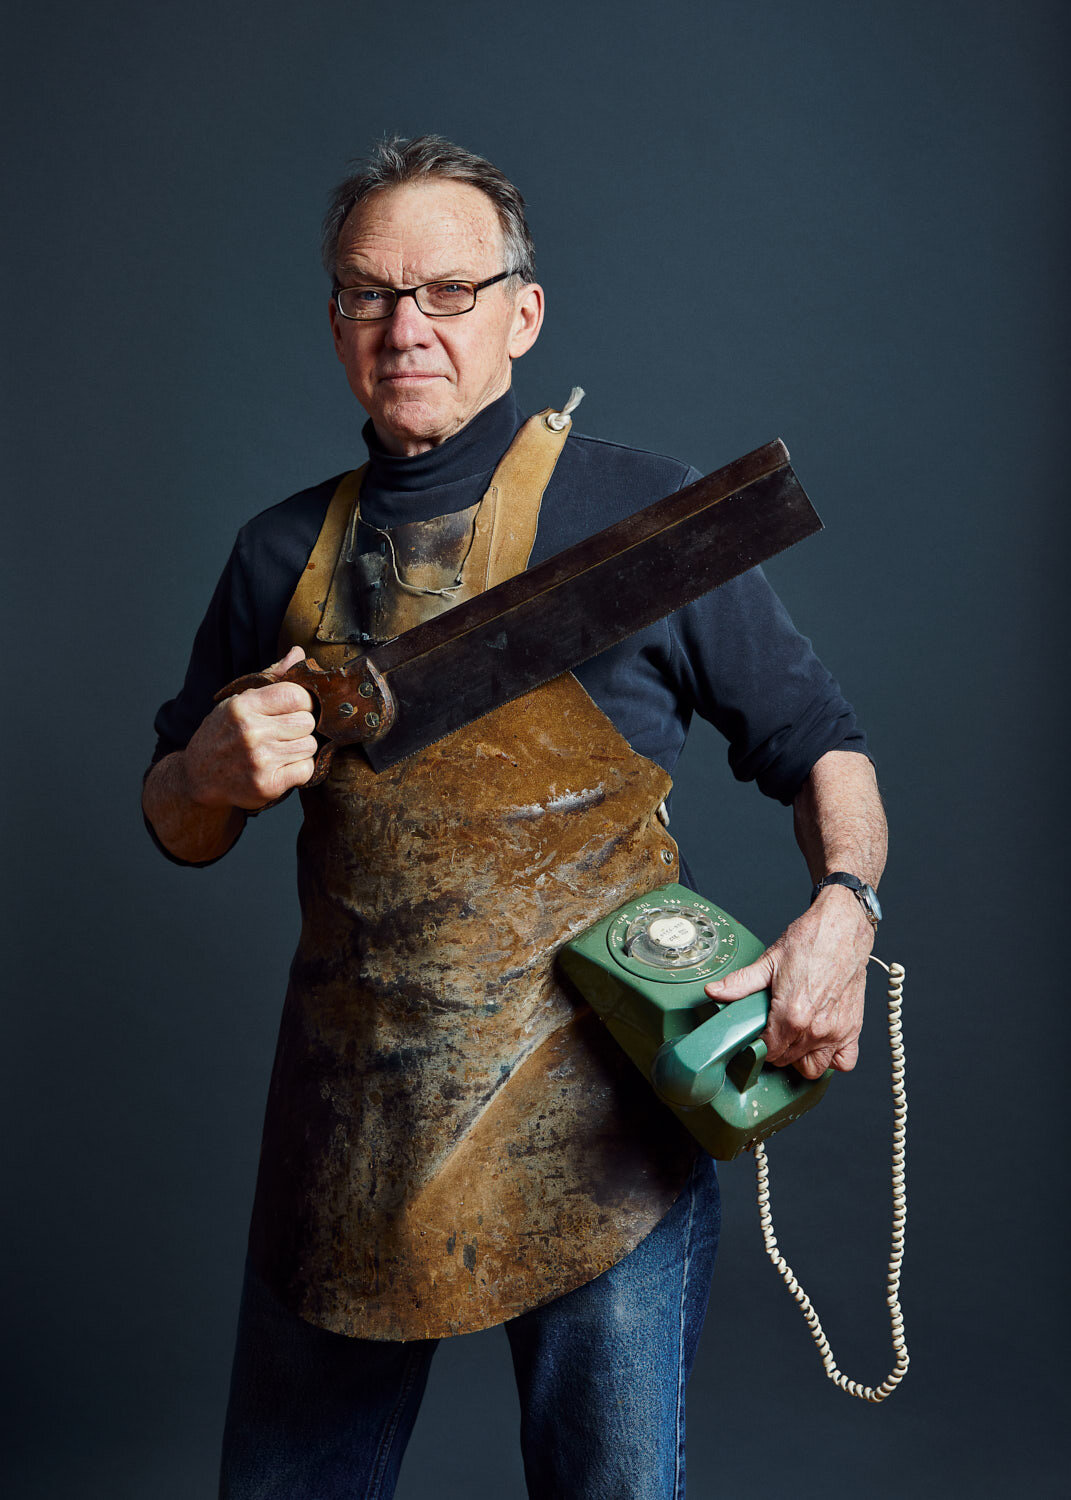 studio portrait of wood worker holding saw and green vintage phone and leather apron